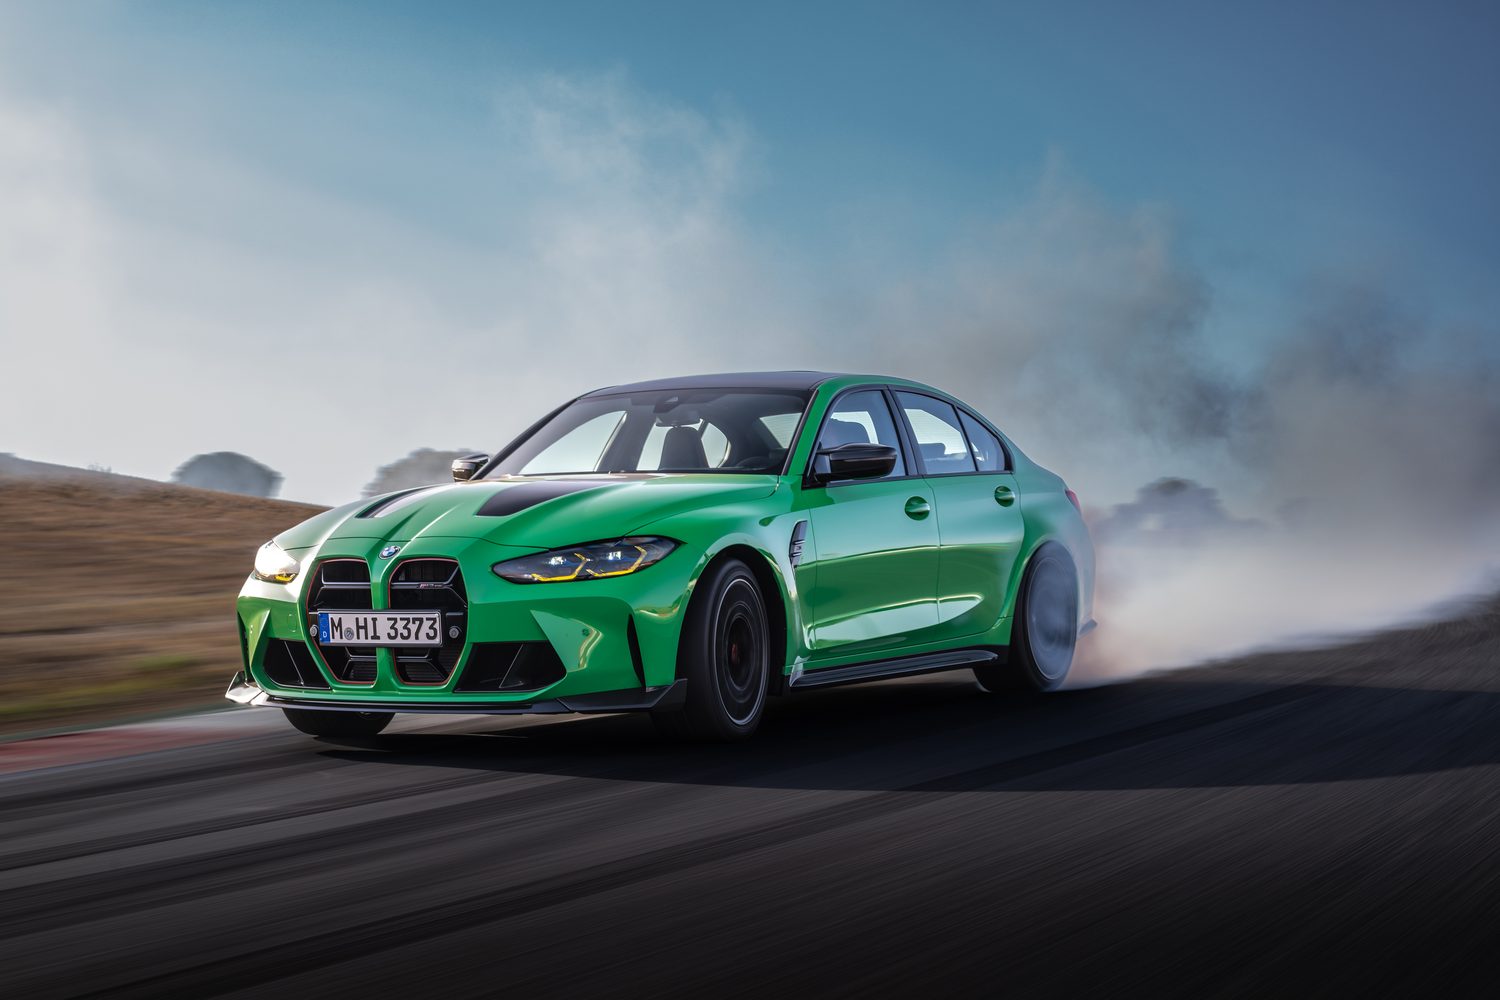 More power, less weight for BMW M3 CS